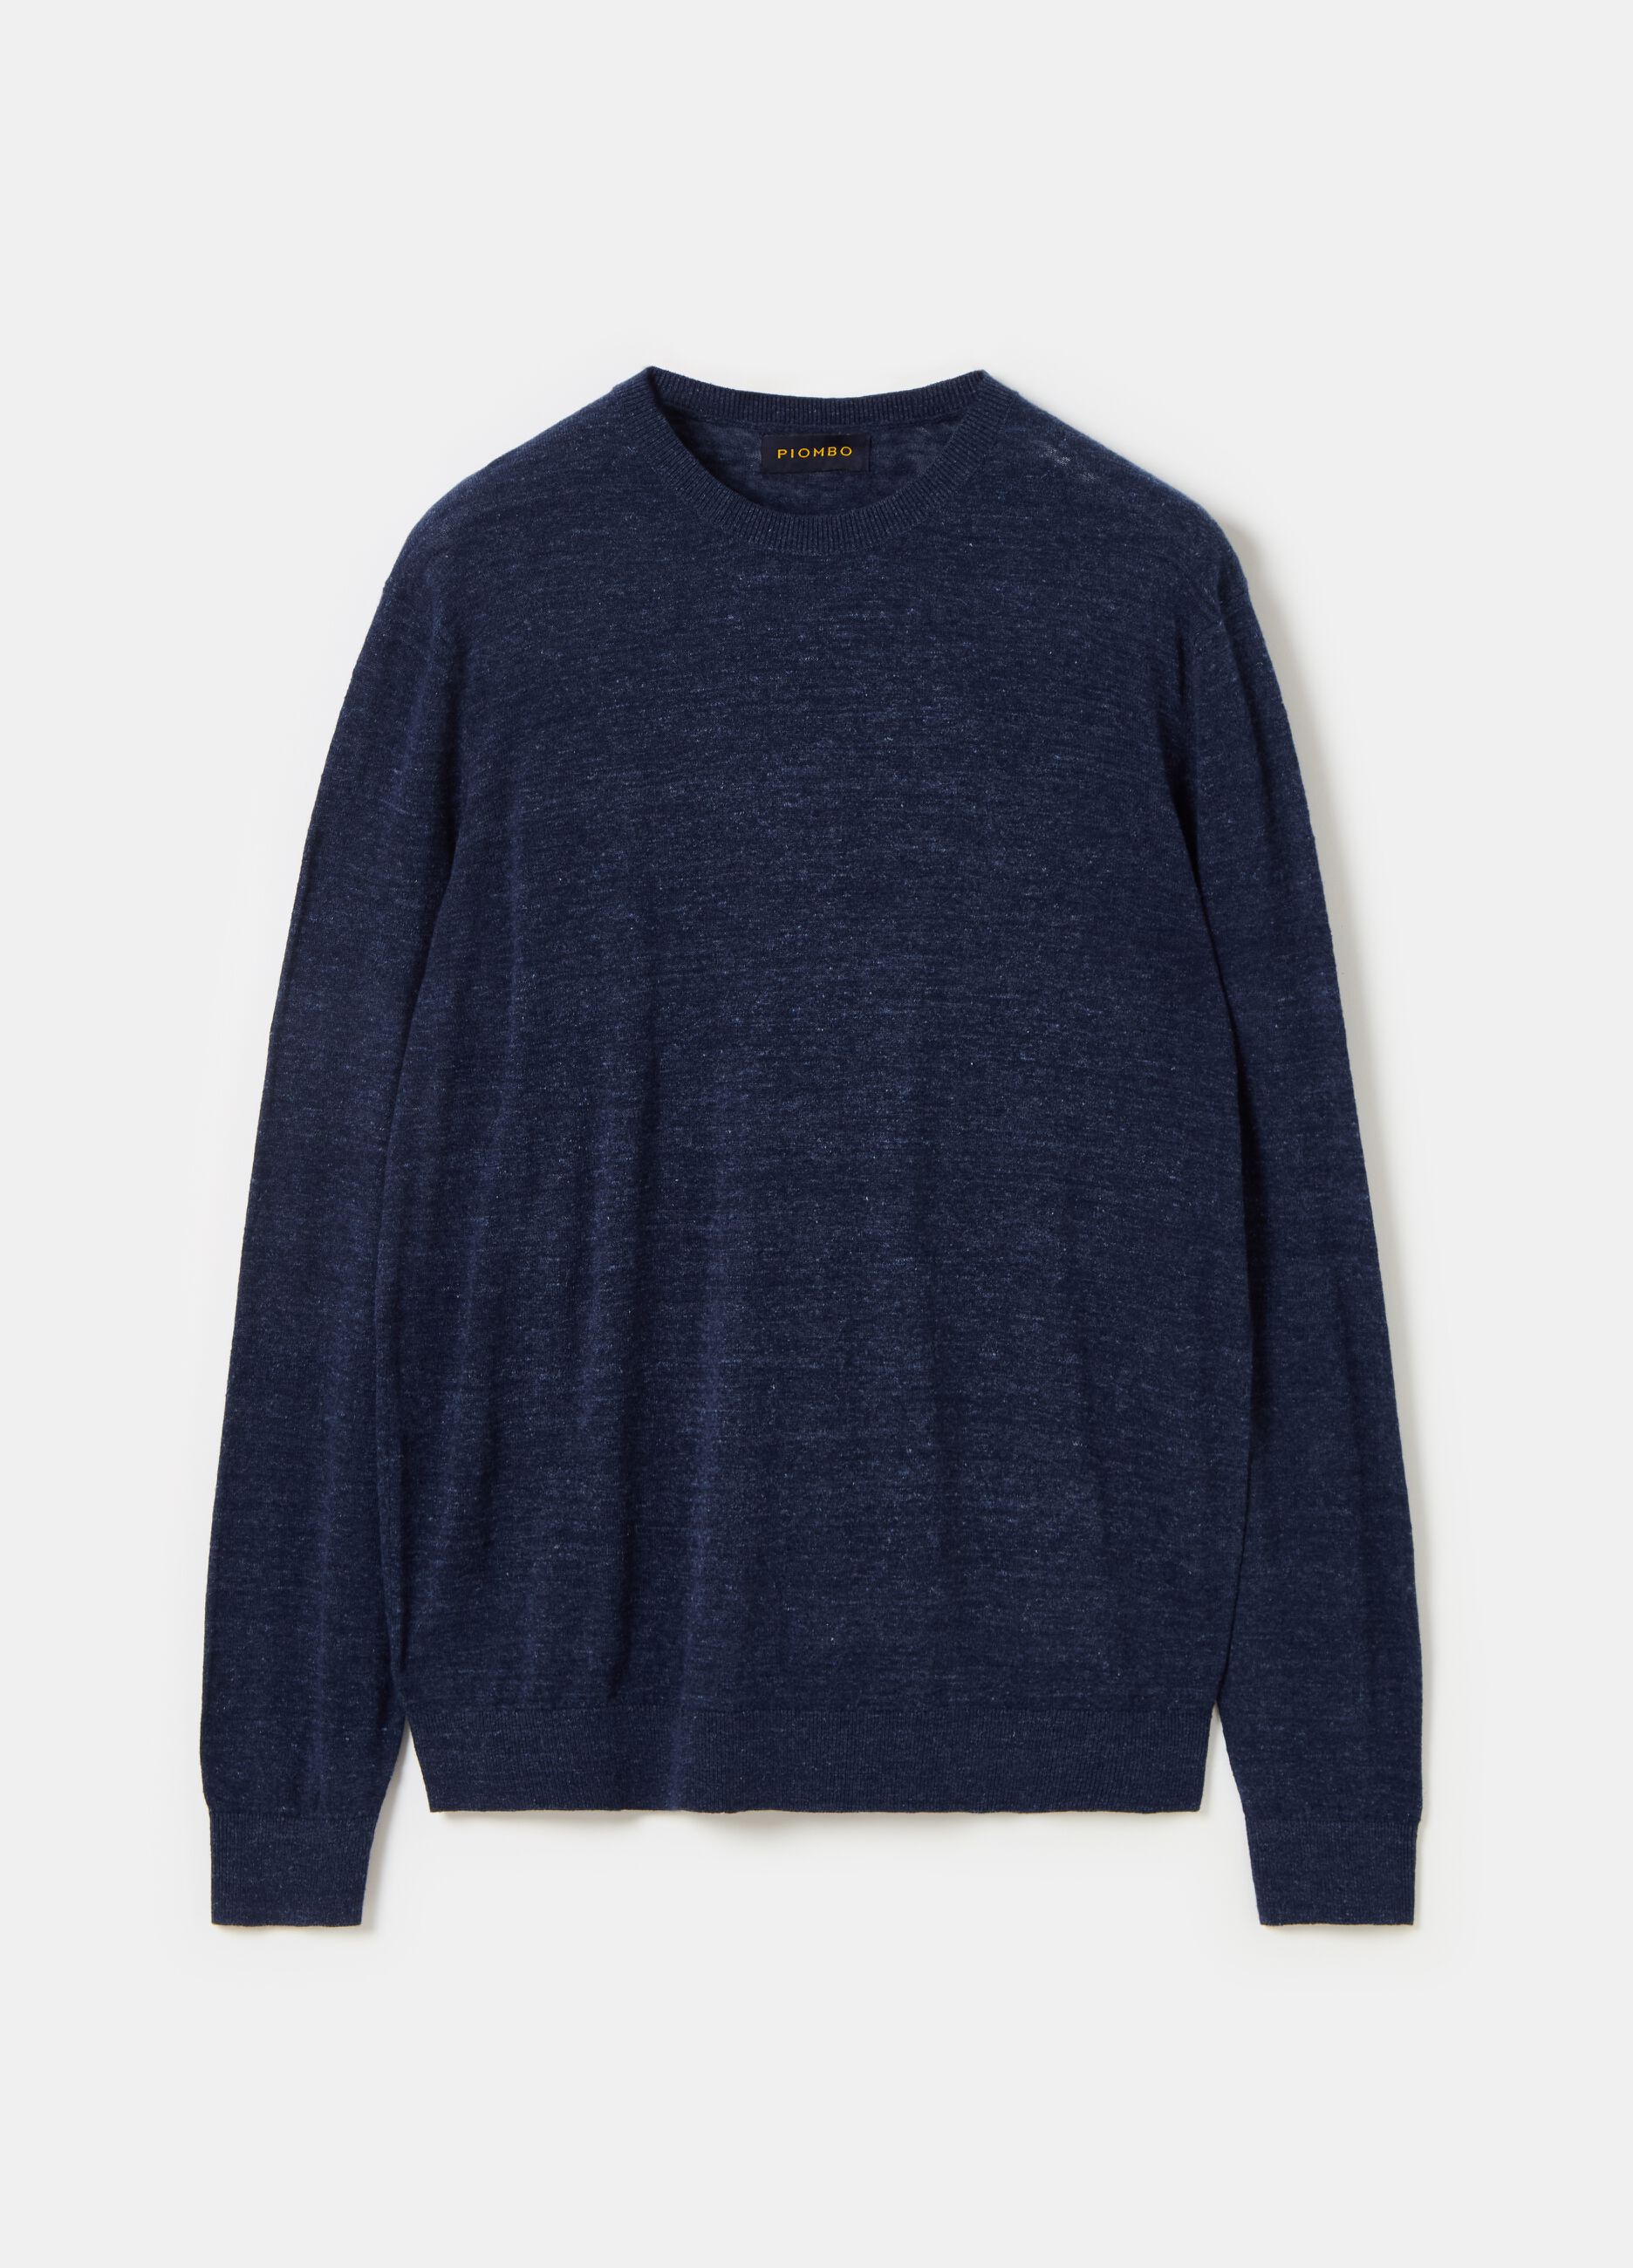 Cotton and linen pullover with round neck